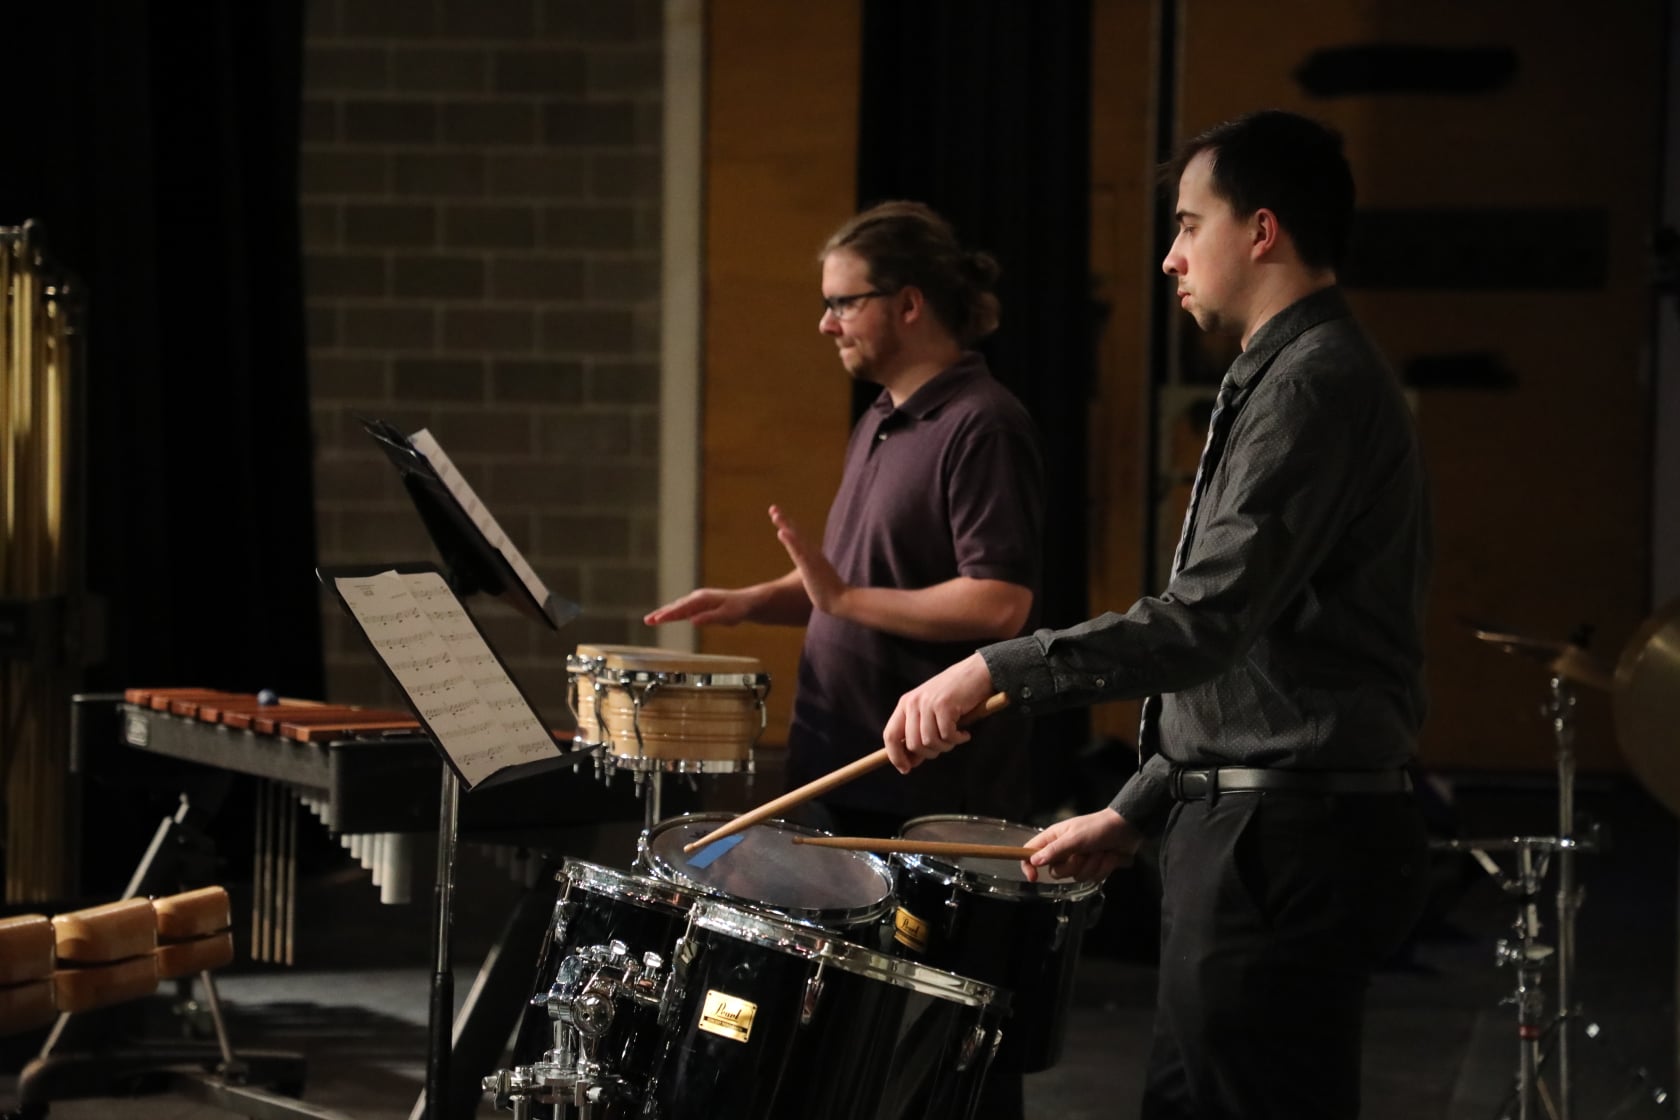 Chamber Winds percussionists performing